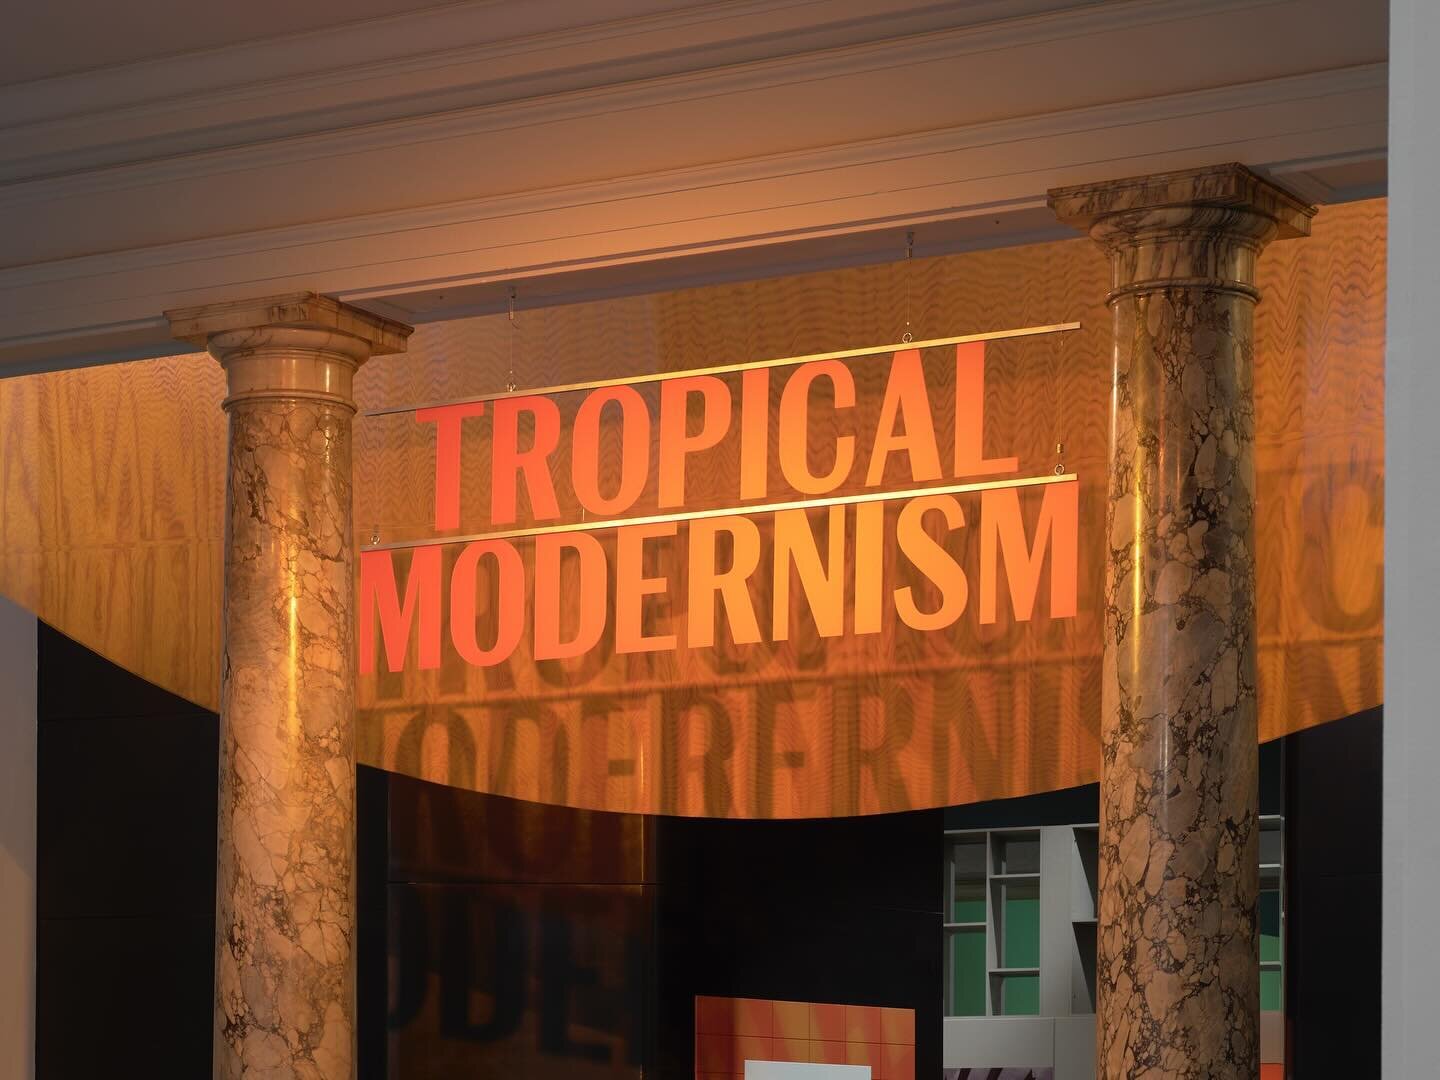 Tropical Modernism at the @vamuseum with @kirsten_hej @recordlighting and @samforsterassociates 

Curated by Chris Turner and Justine Sambrook.

📸 Thomas Adank